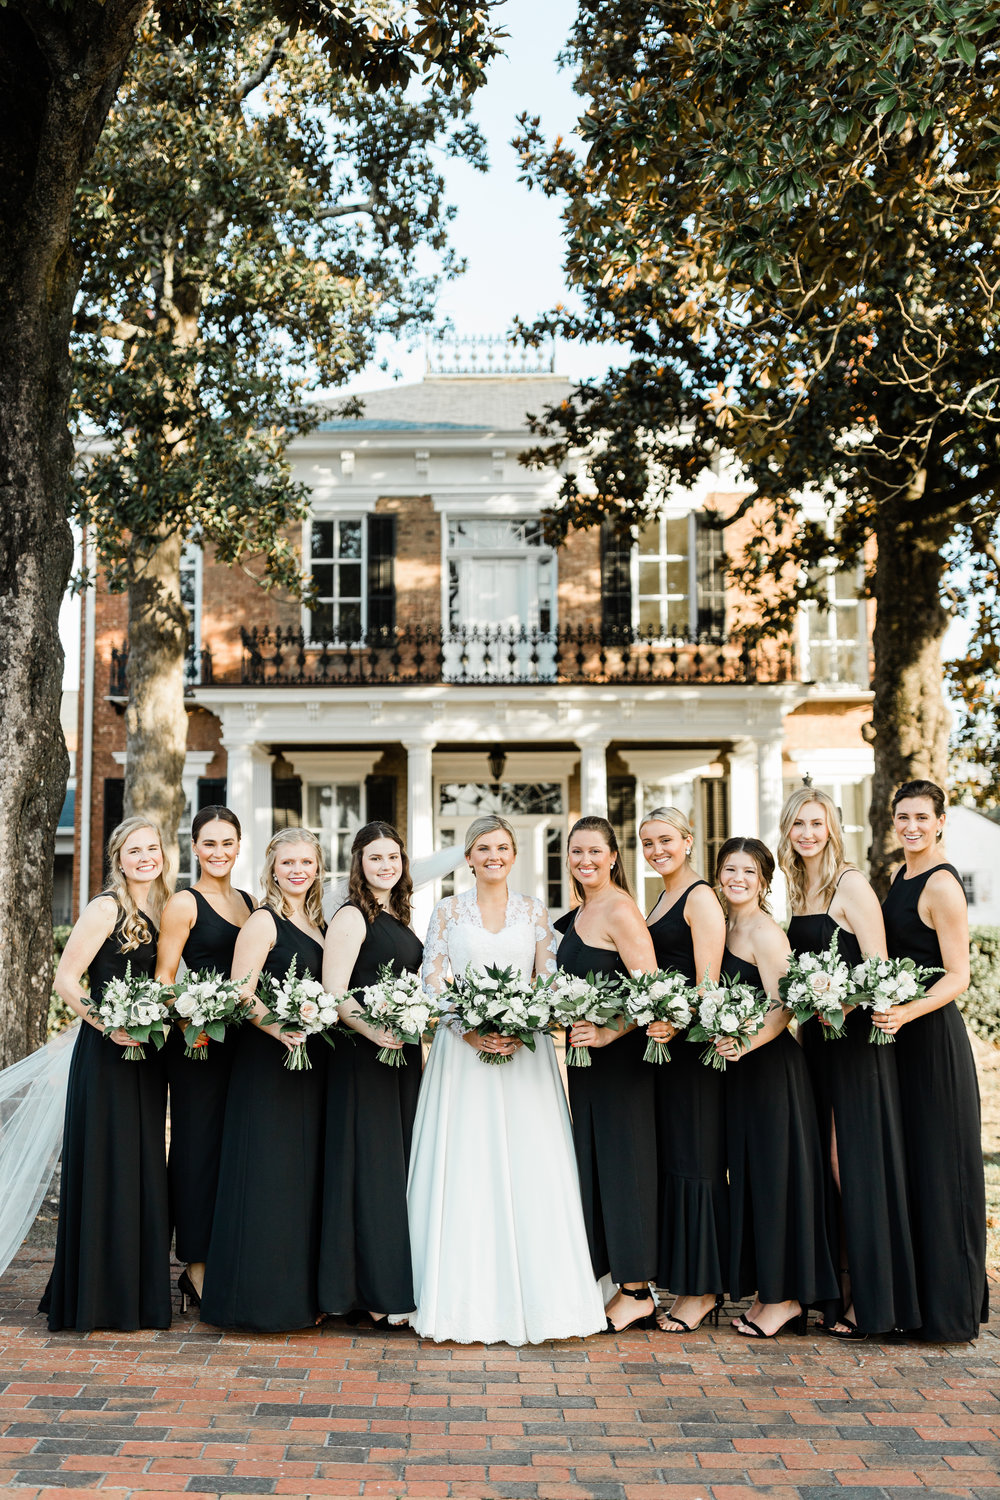 The Axtells Wedding Photography & Films captured the many special moments of the Dec. 31, 2021, wedding of Mary Kate Morgan and Joseph Riddle IV. Here, Mary Kate is pictured with bridesmaids, left to right, Jessie Keener, Patricia Kalevas, Marian “Covey” Holmes, Elizabeth Moorman, maid-of-honor Sebrell Singleton, Jillian Kaehler, Catherine Moorman, Jane March Riddle and Anna Huff.